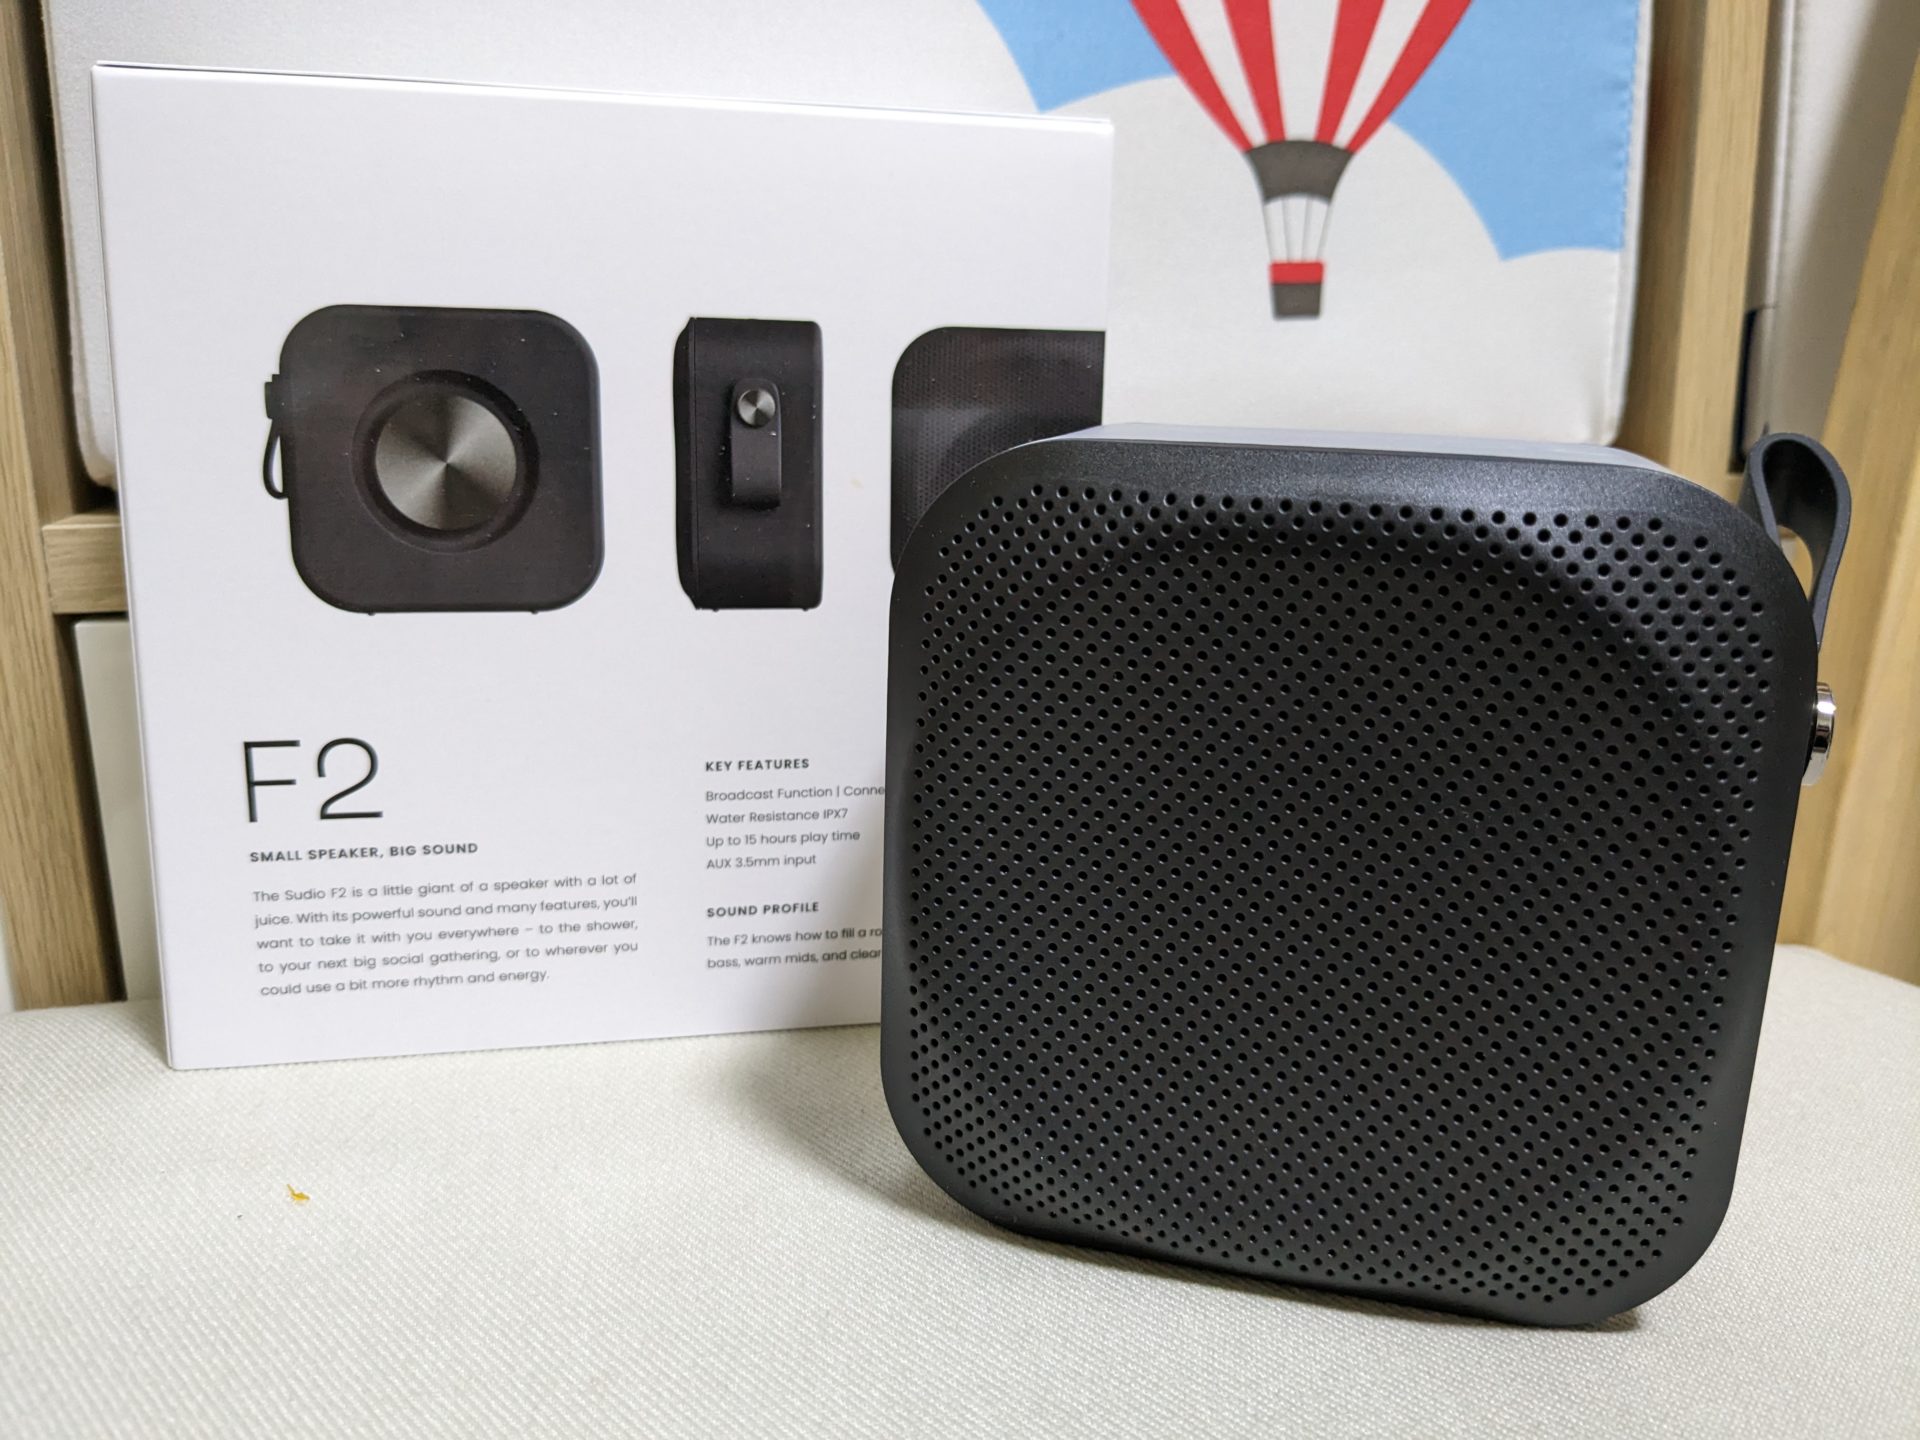 What Do You Get When You Spend More for Speakers?